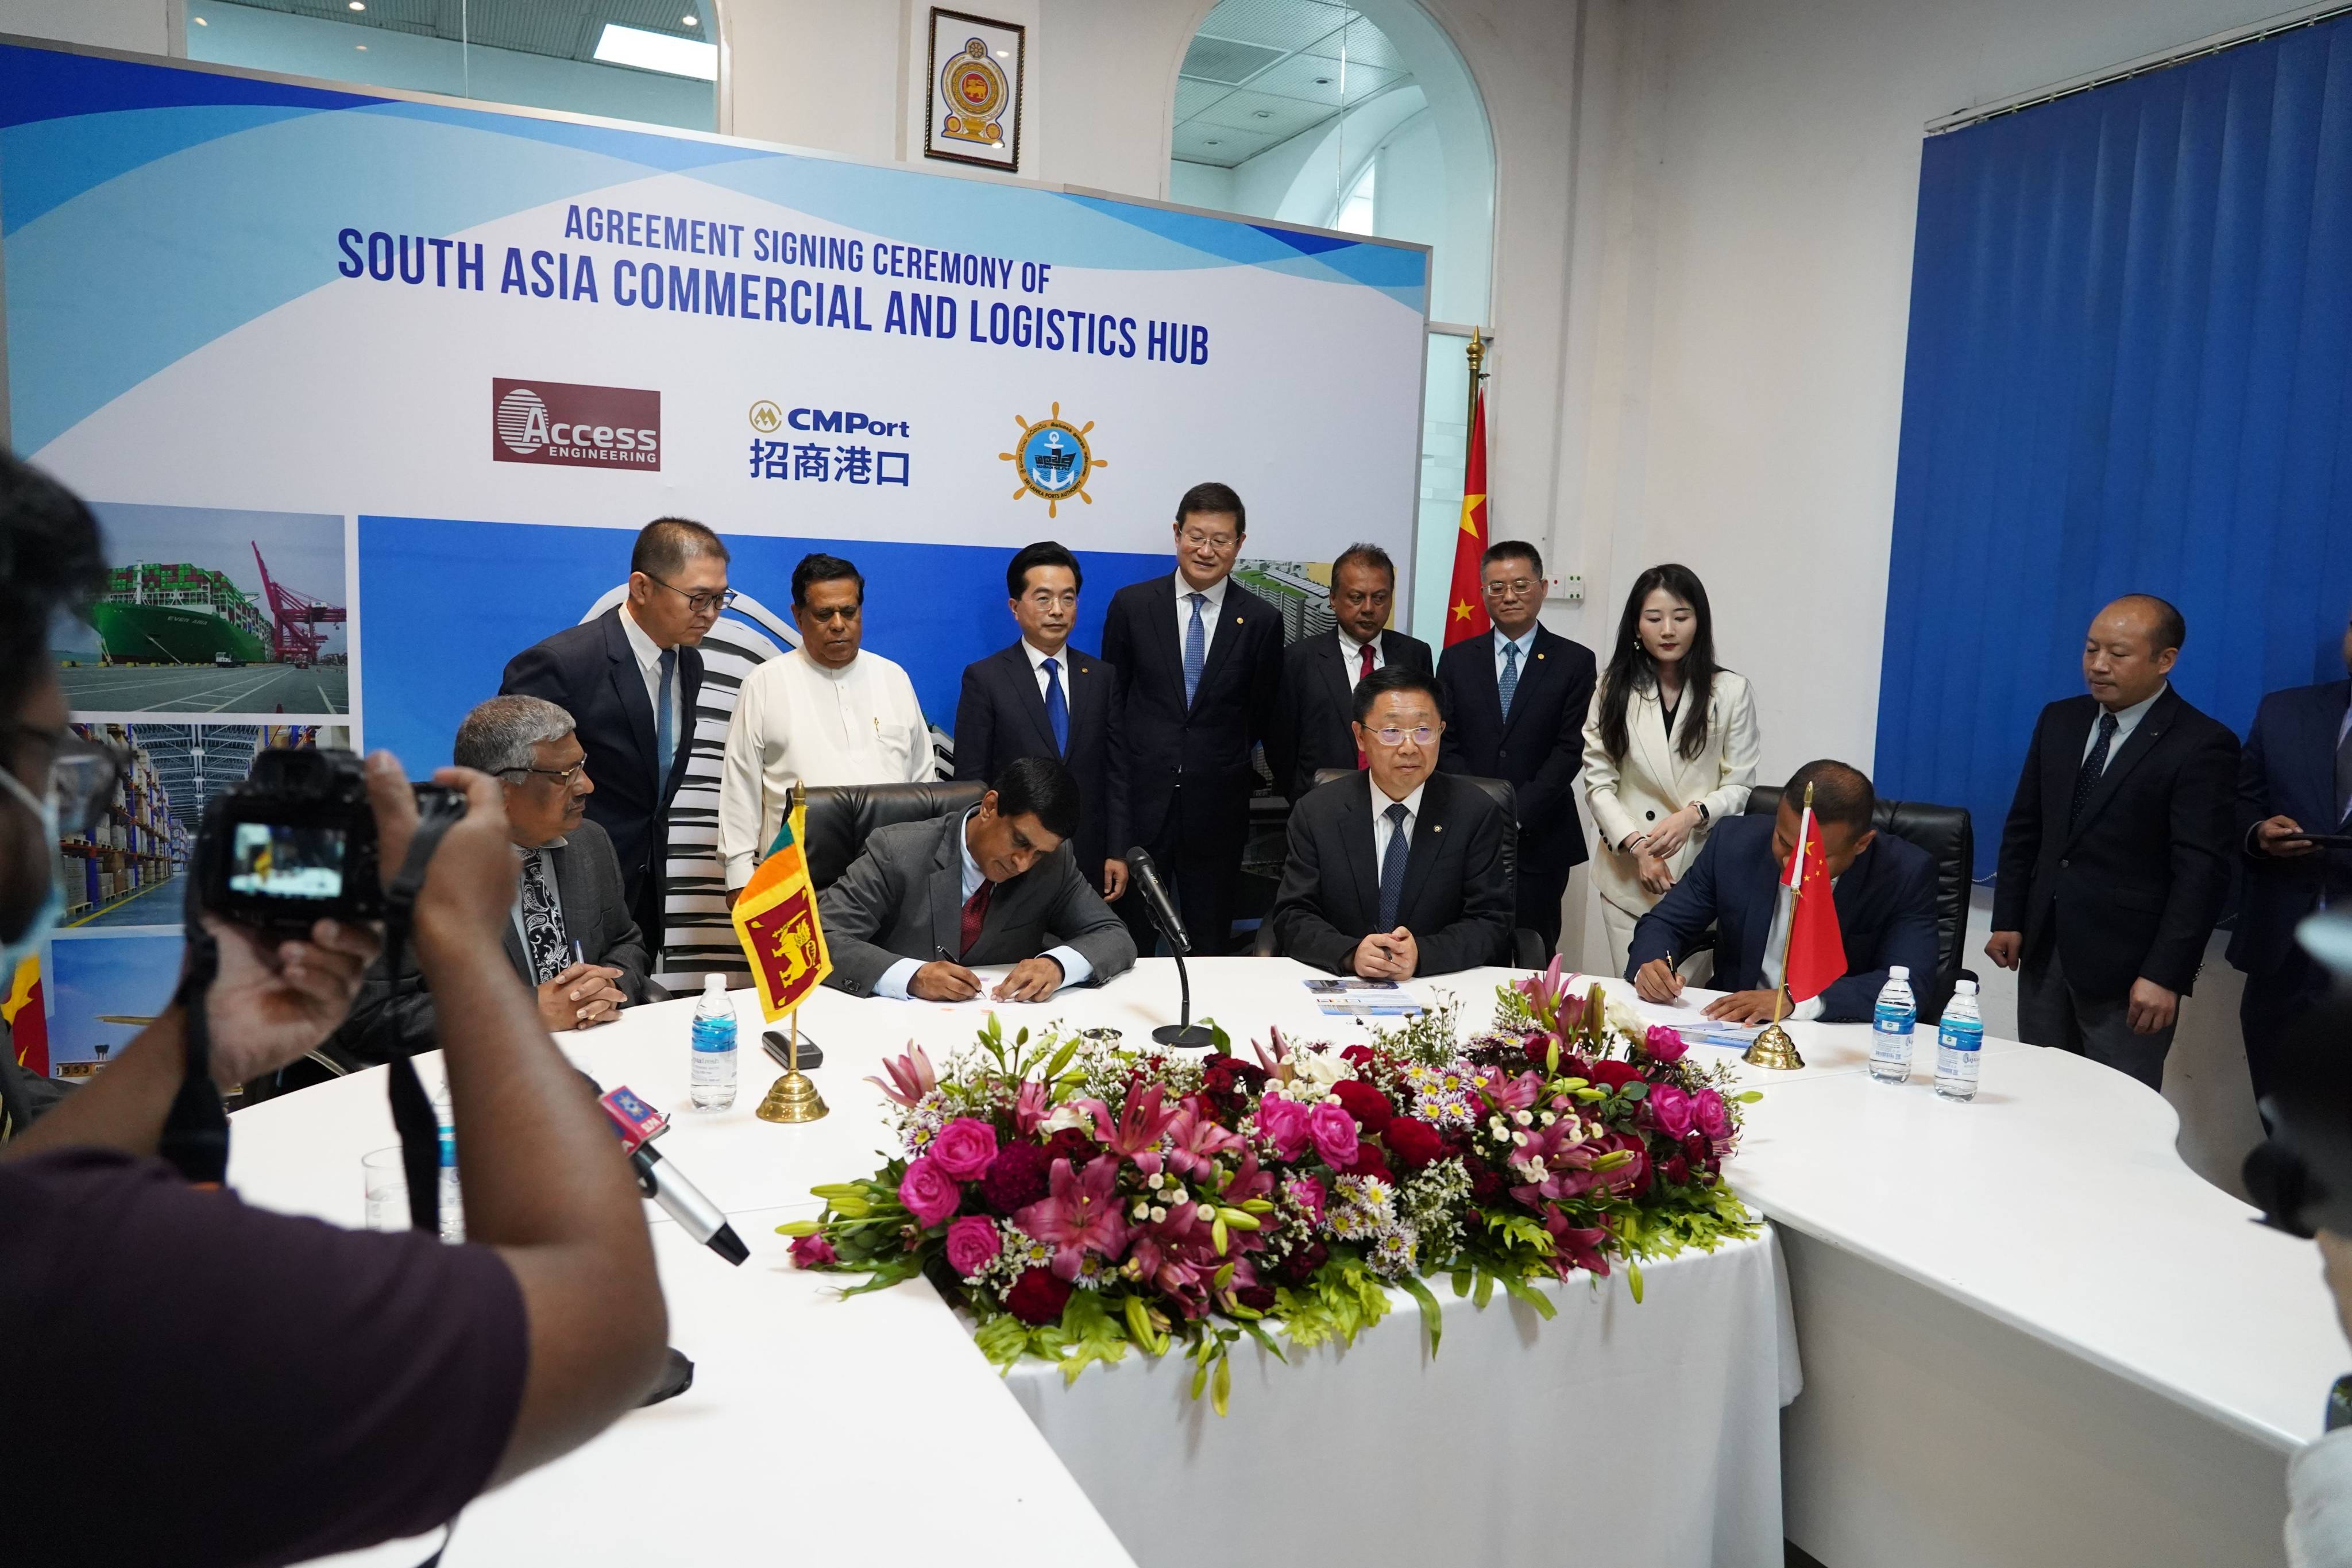 Representatives of Sri Lanka Ports Authority, a local civil engineering enterprise, and China Merchants Port Holdings at a signing ceremony of an agreement to jointly build a commercial and logistics hub at Colombo Port. Photo: Xinhua